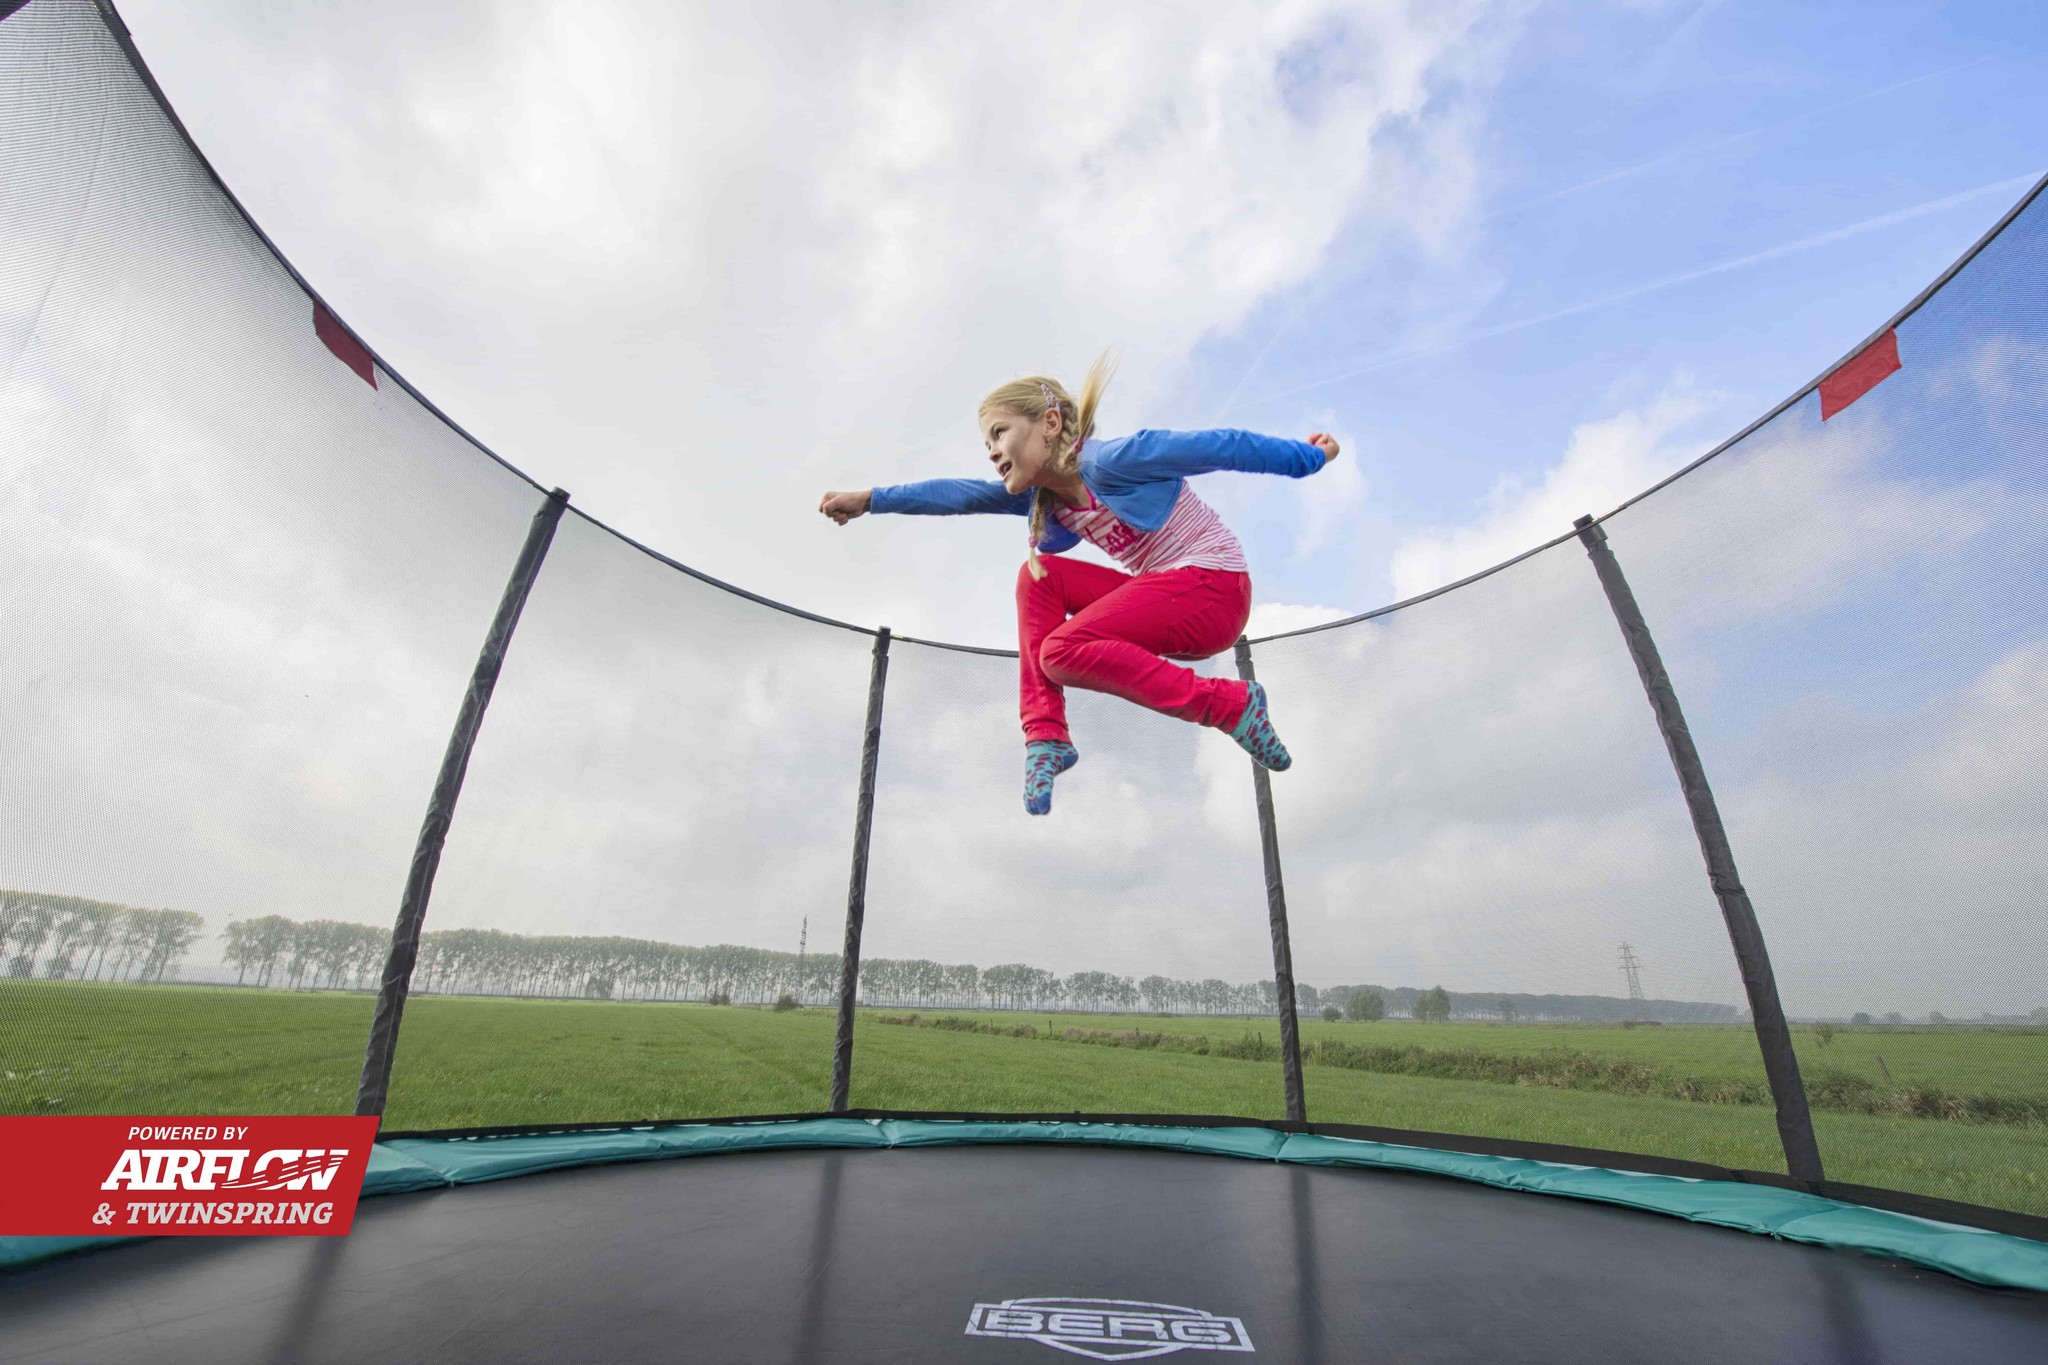 Trampoline Champion 330 + safety de luxe - Fairplace